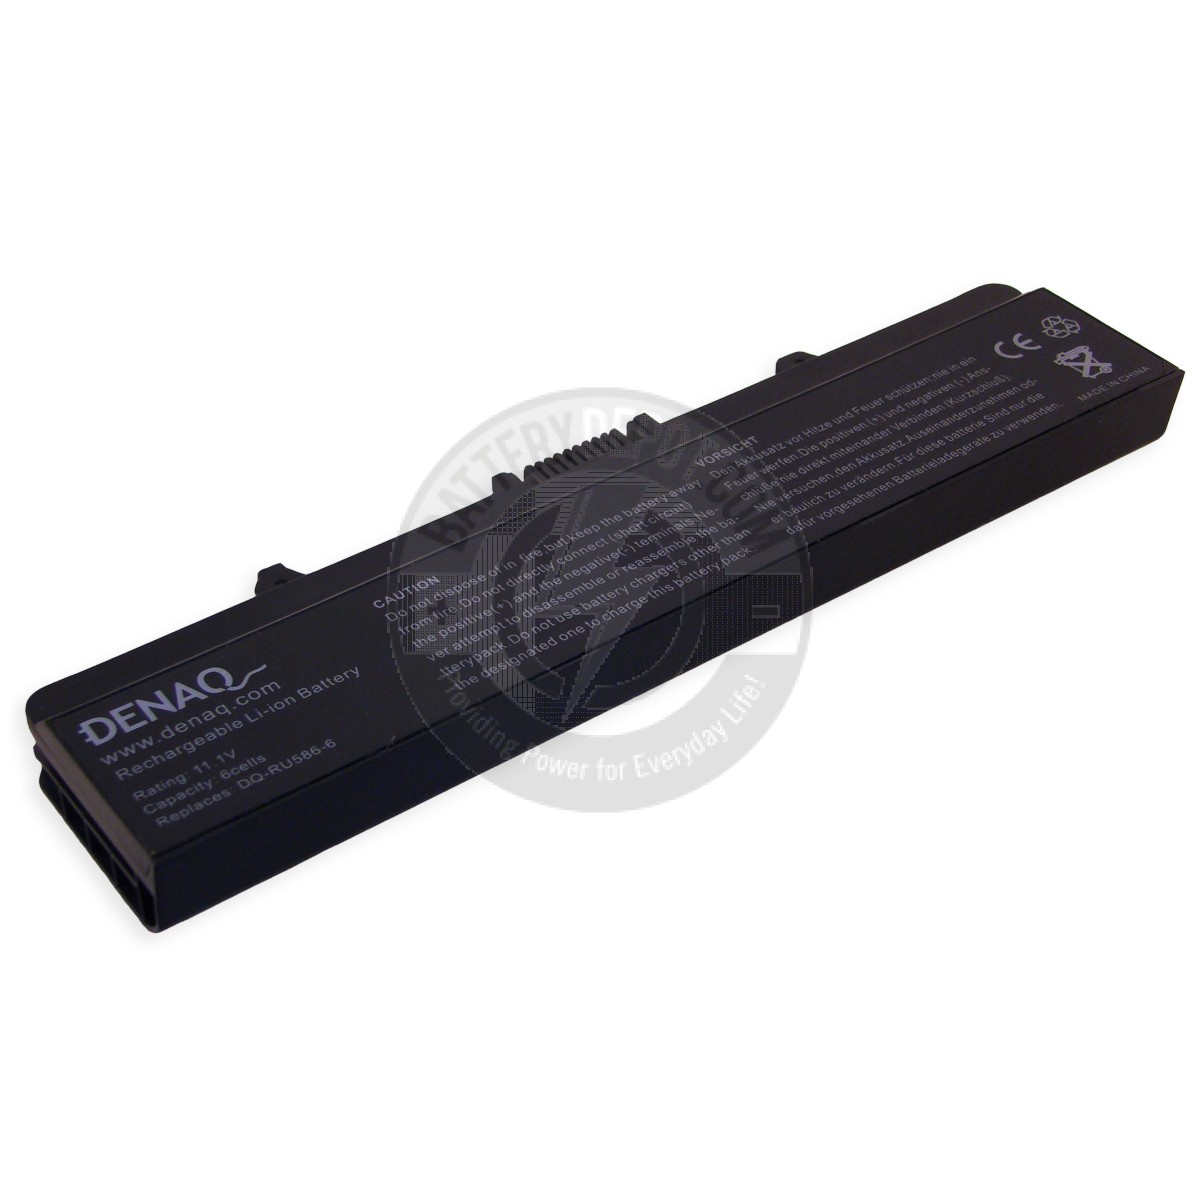 6 cell battery for Dell Laptops made with Samsung High Quality cells